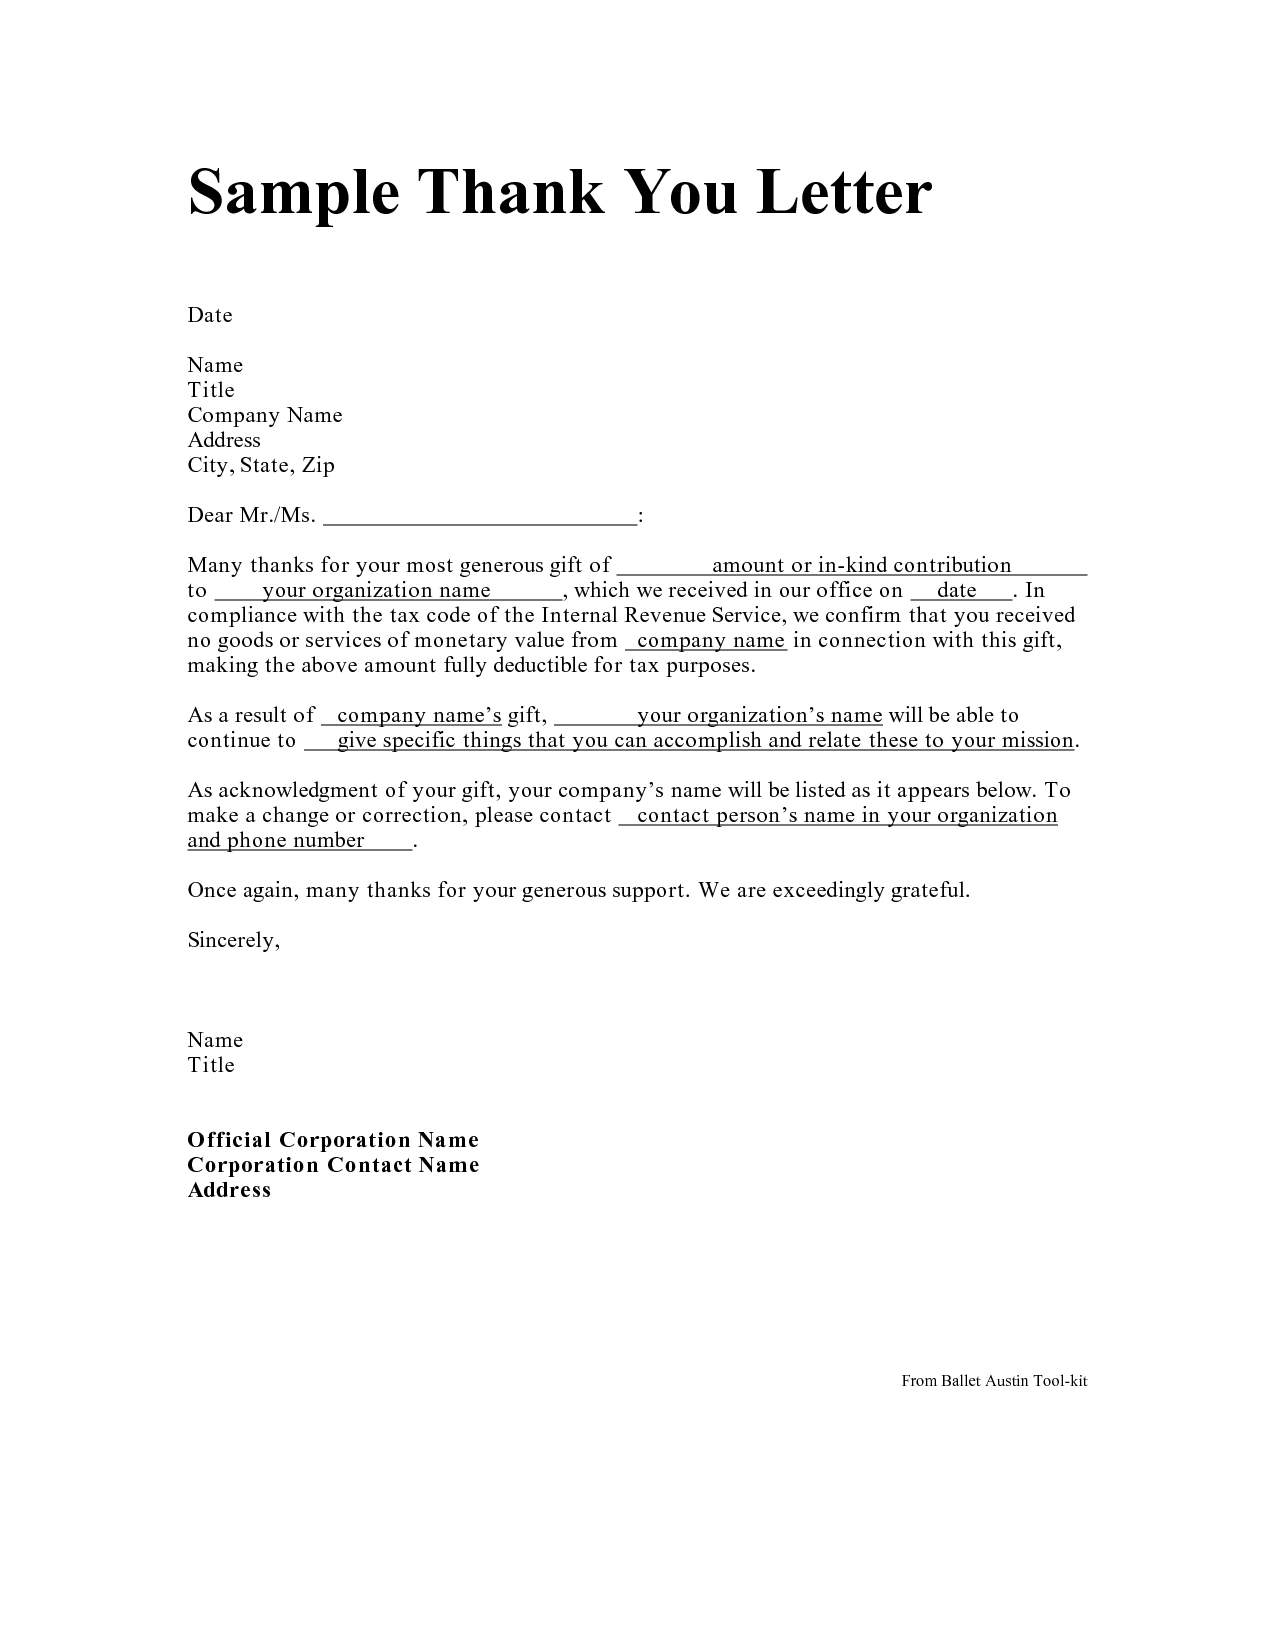 tax-write-off-donation-letter-template-samples-letter-template-collection